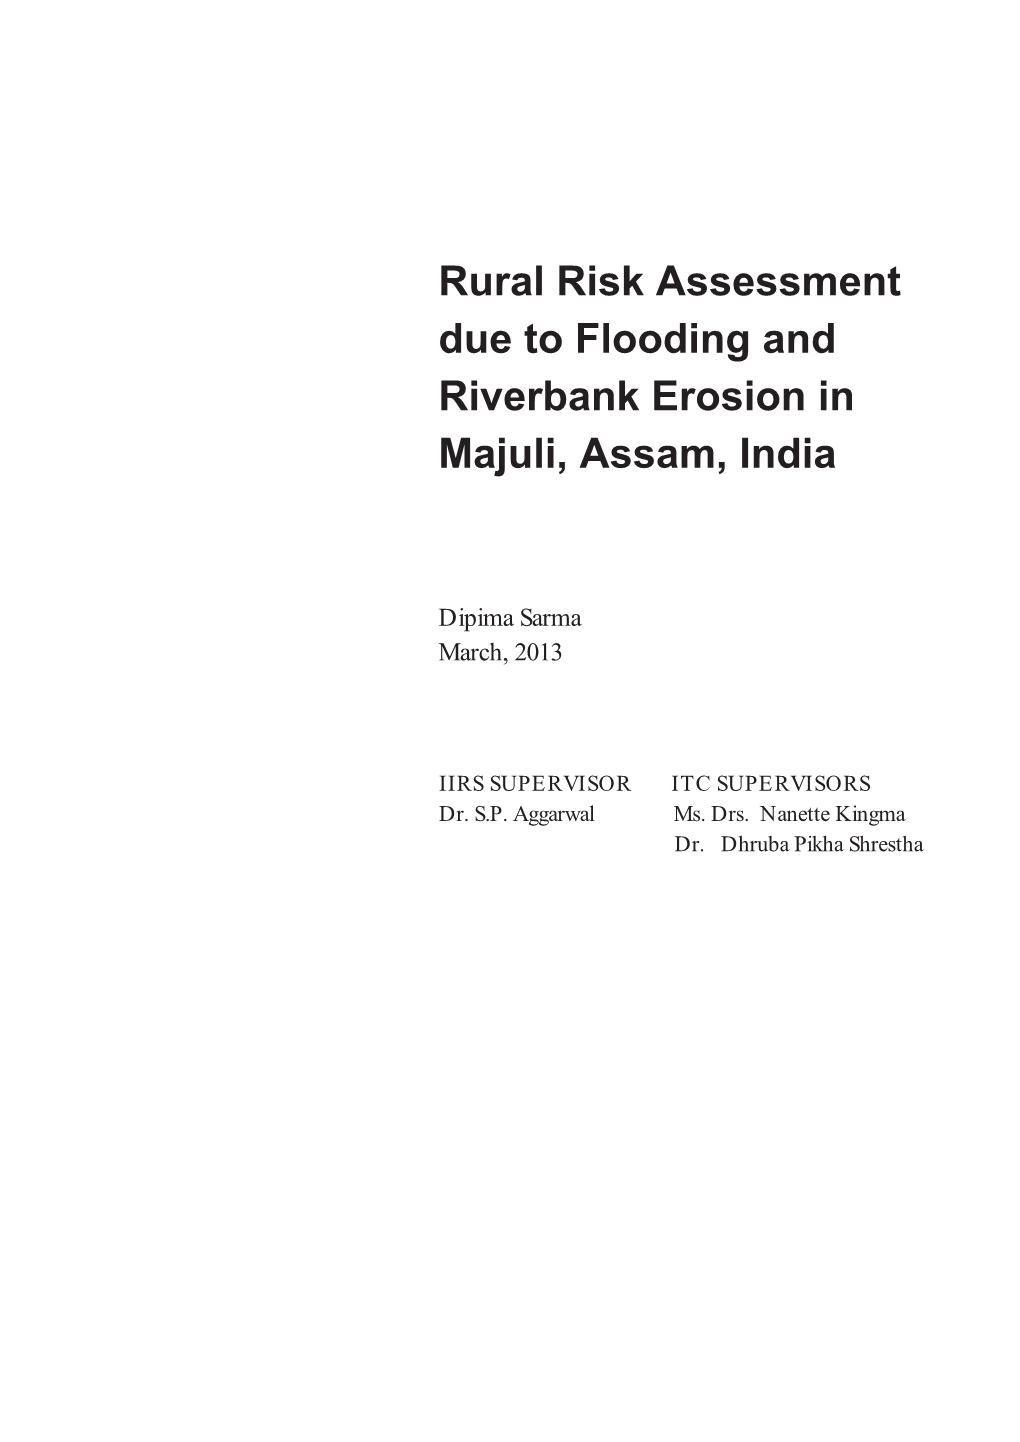 Rural Risk Assessment Due to Flooding and Riverbank Erosion in Majuli, Assam, India